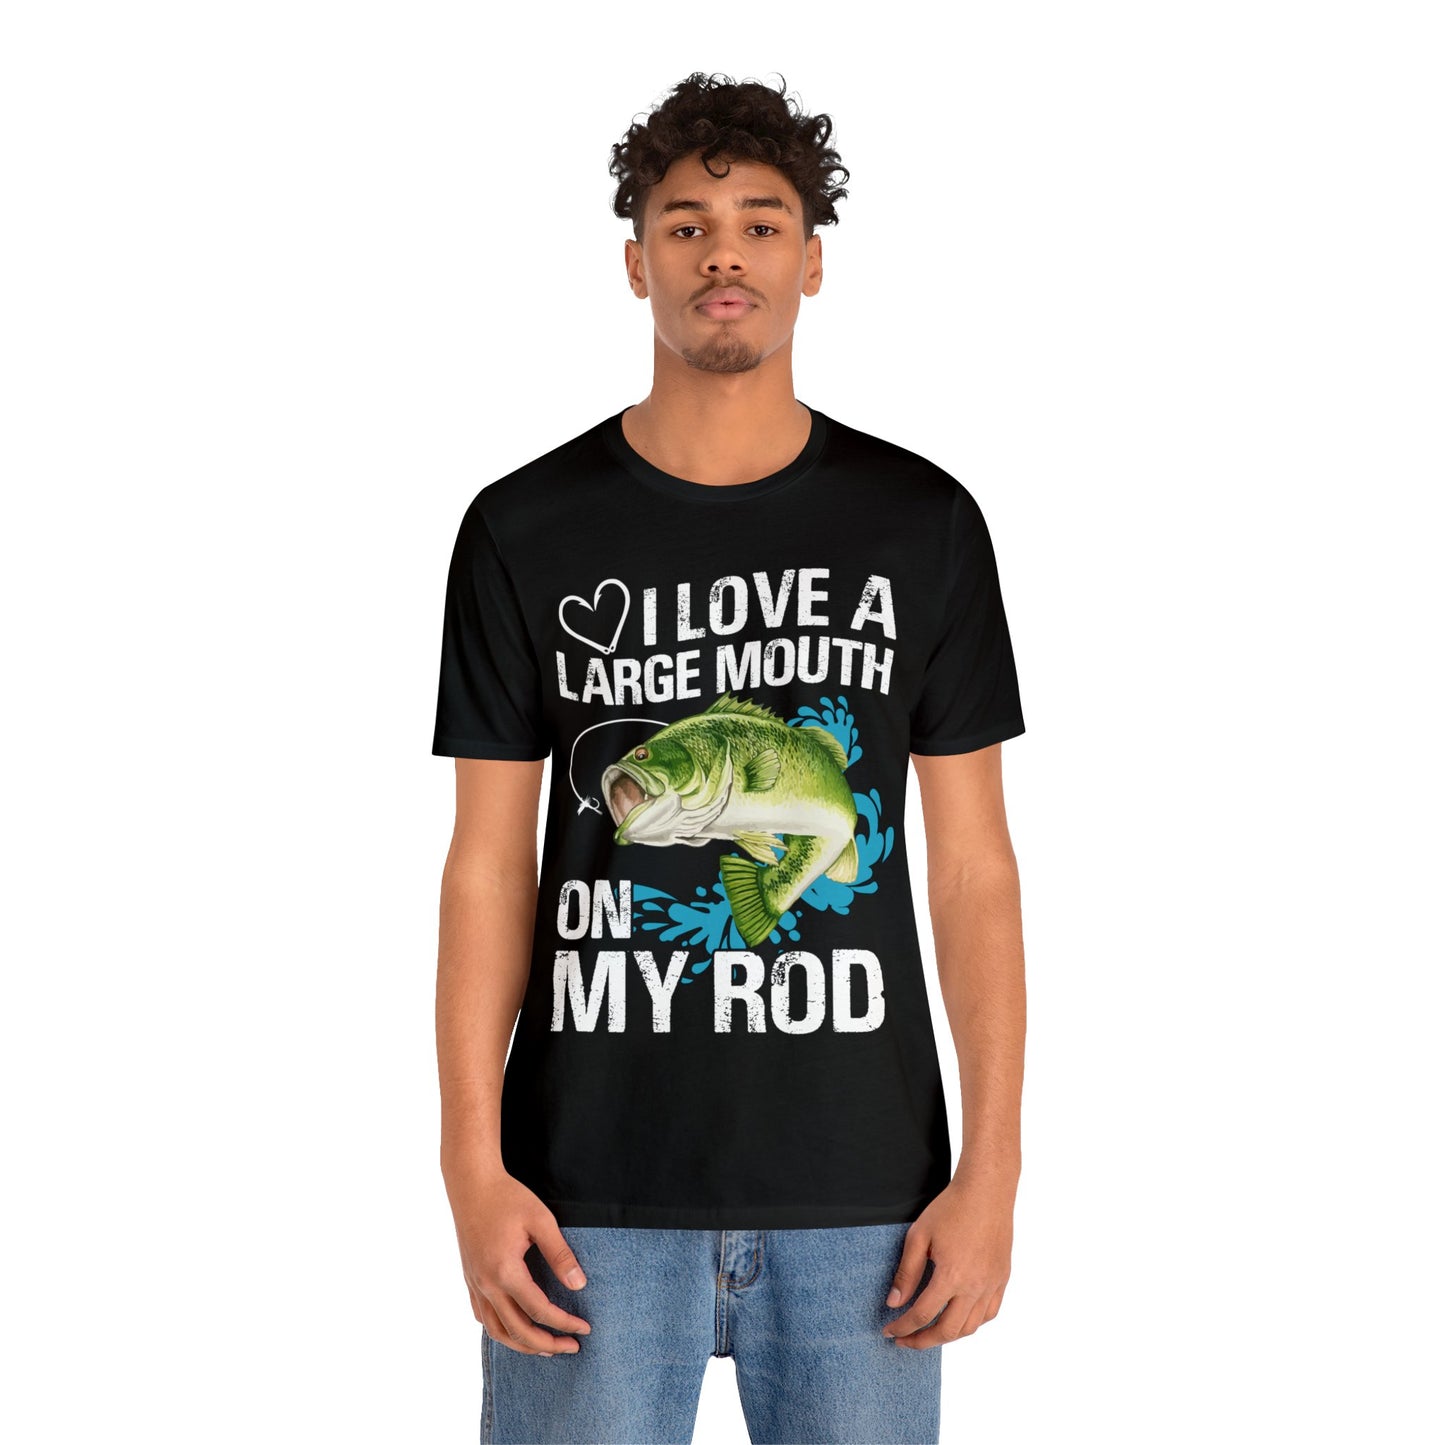 I love a large mouth on my rod T-Shirt